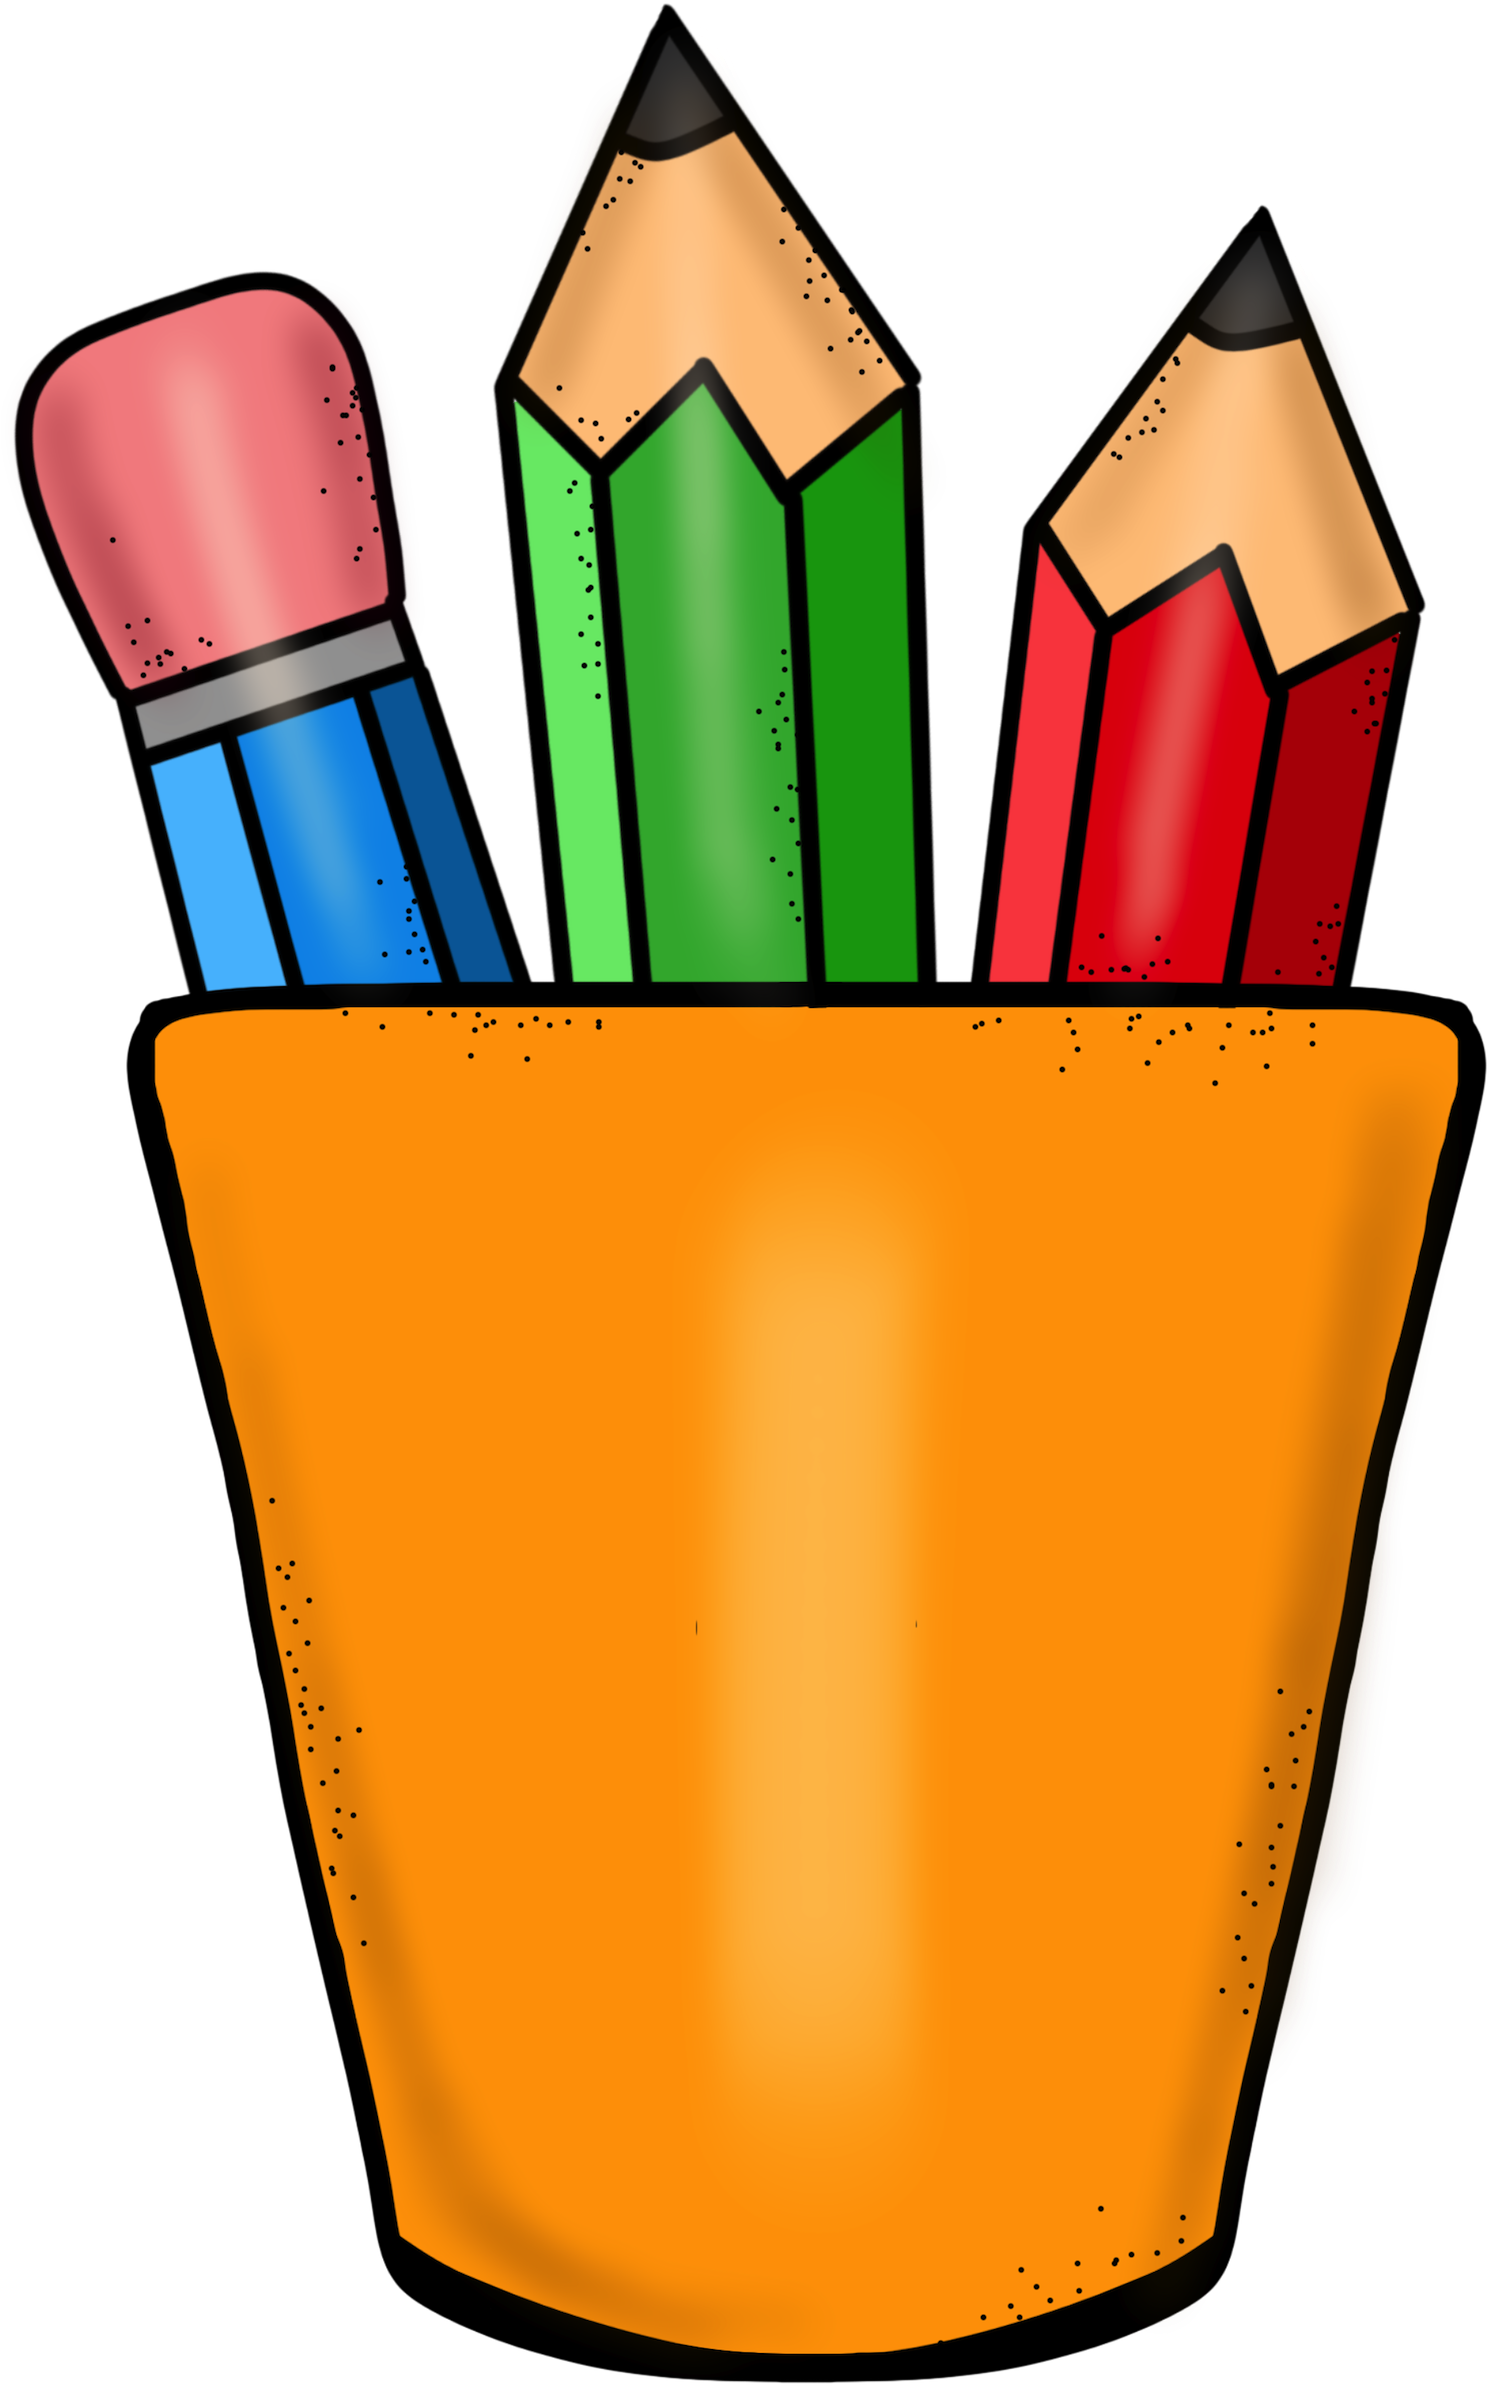 Motivating Students To Revise And Edit Their Writing - Pencil Pot Clipart (1499x2400)